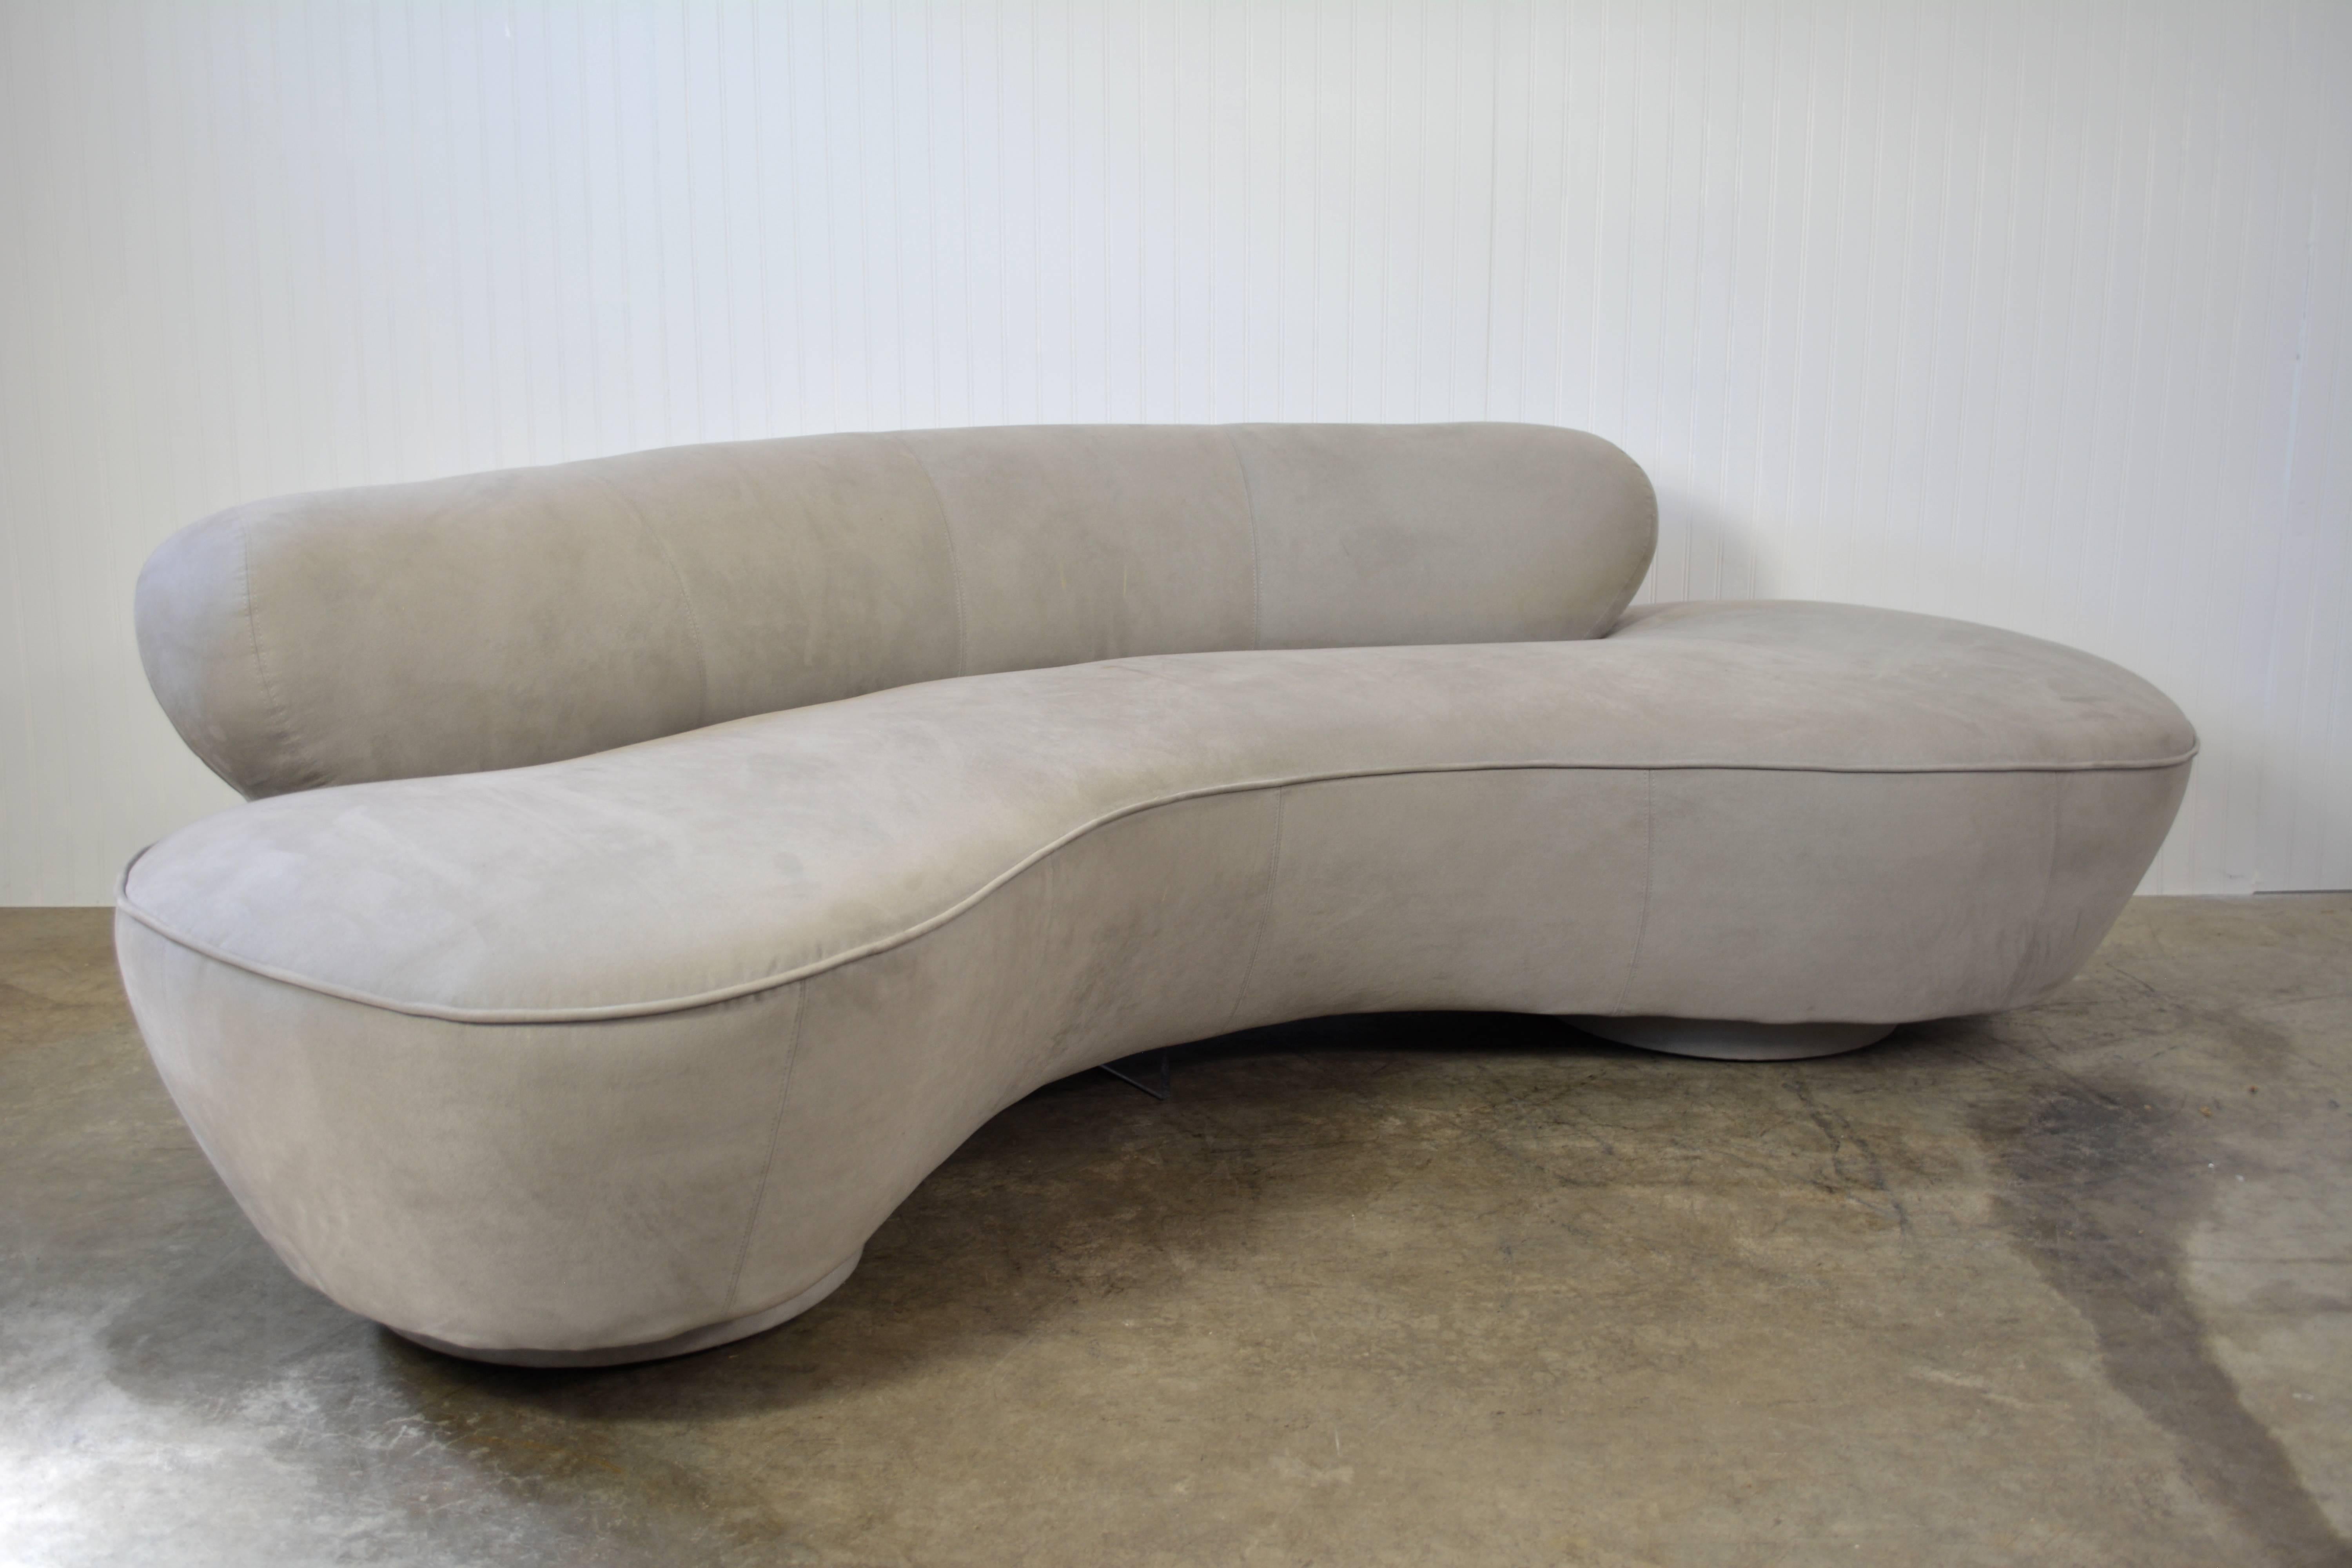 All original Vladimir Kagan sofa for Directional. Lucite support plate and Directional label present.

Measures: Overall depth of the sofa is 48